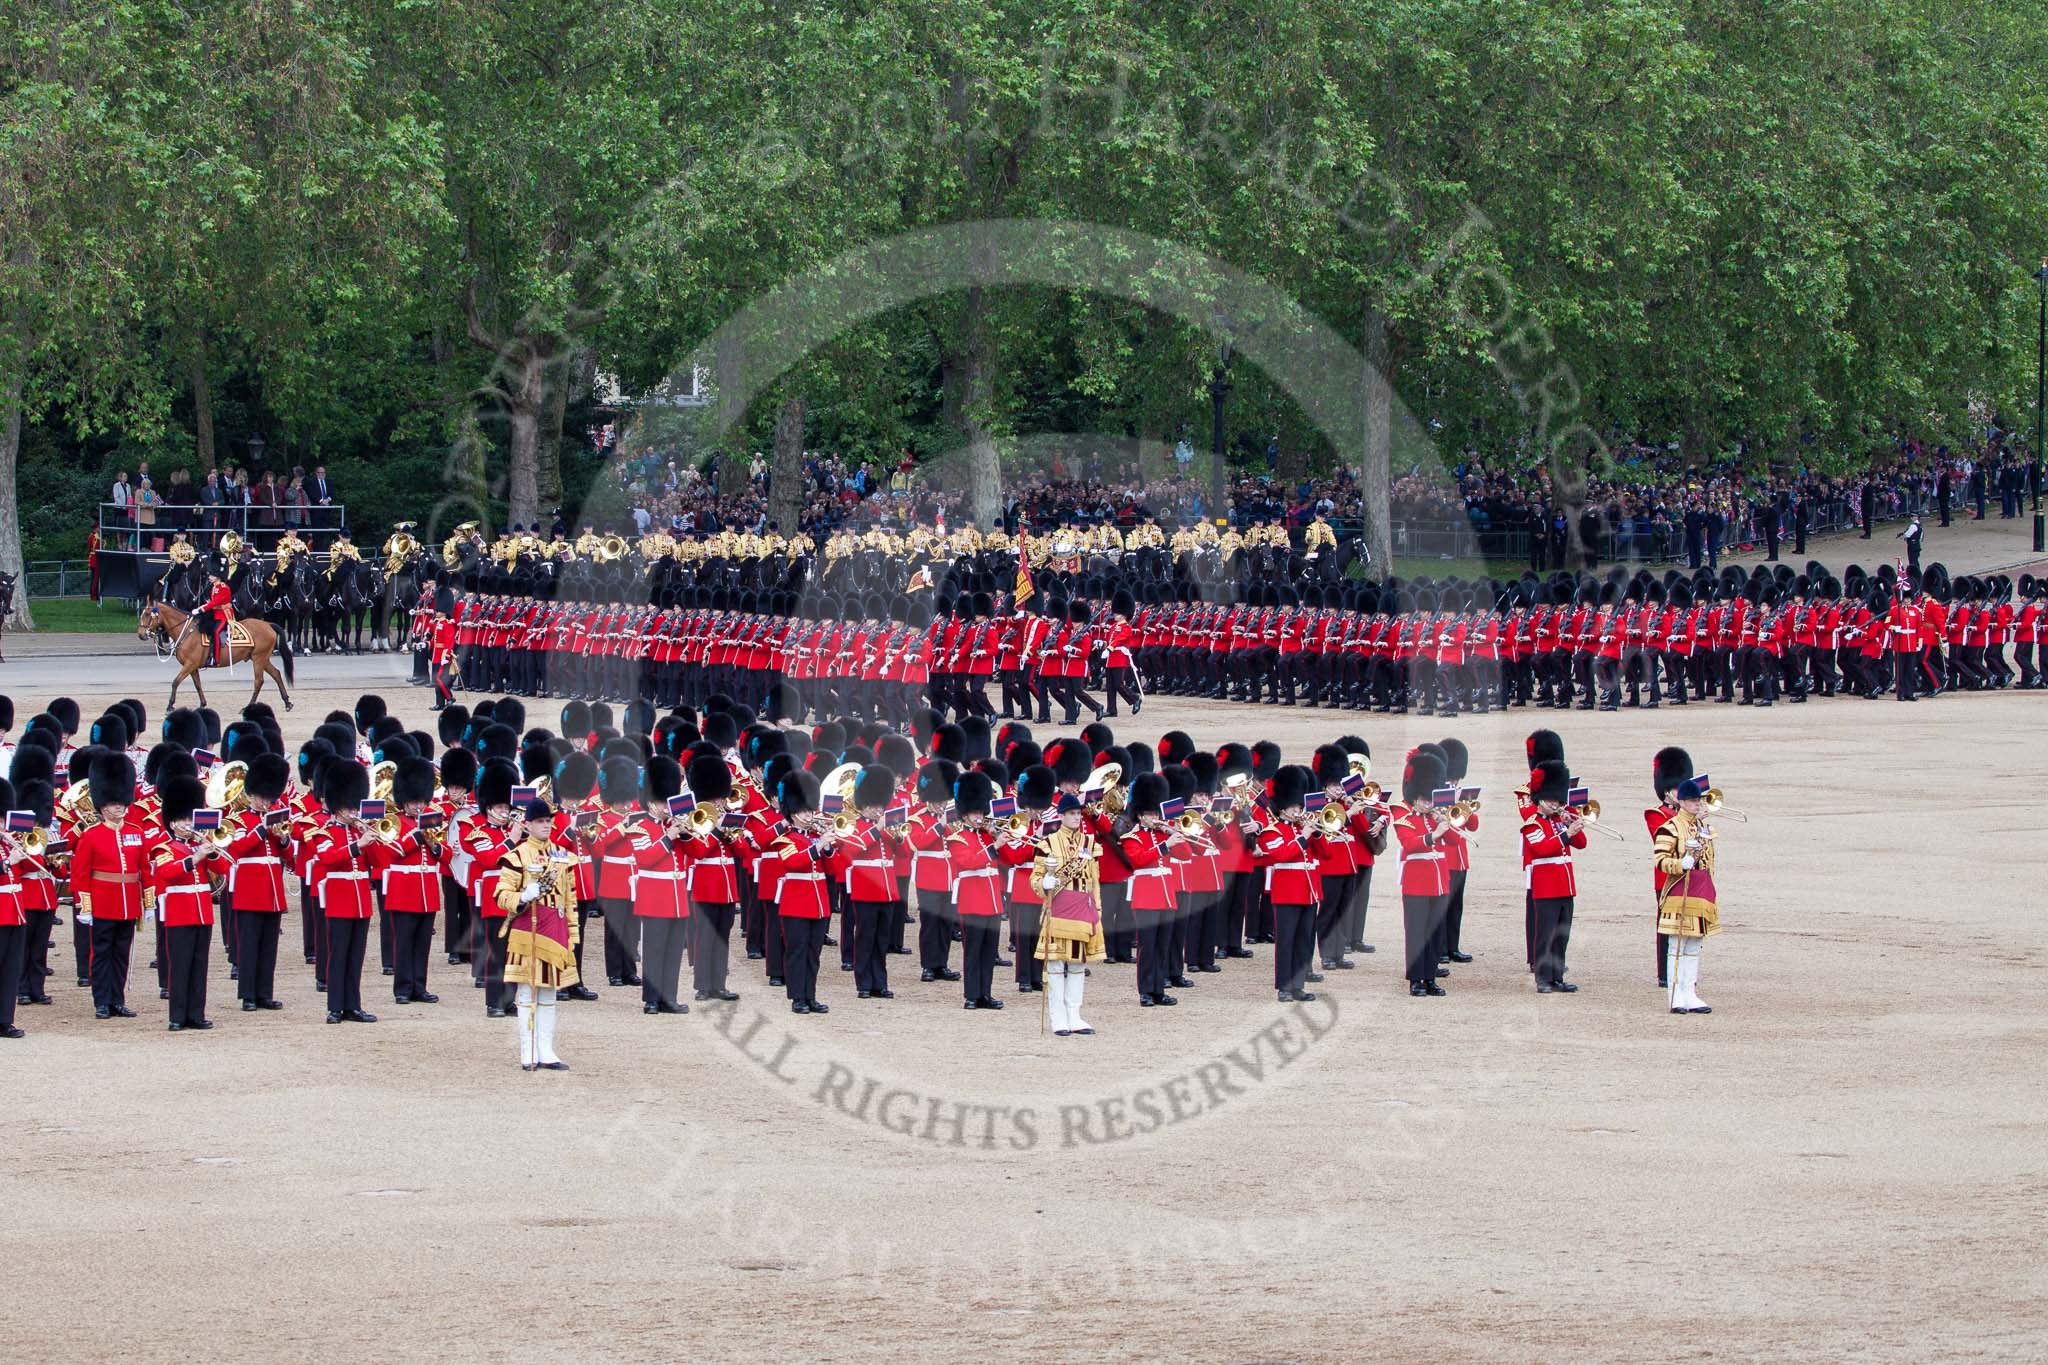 Trooping the Colour 2012: The March Past in Quick Time, the guards divisions turning left again along St. James's Park..
Horse Guards Parade, Westminster,
London SW1,

United Kingdom,
on 16 June 2012 at 11:48, image #510